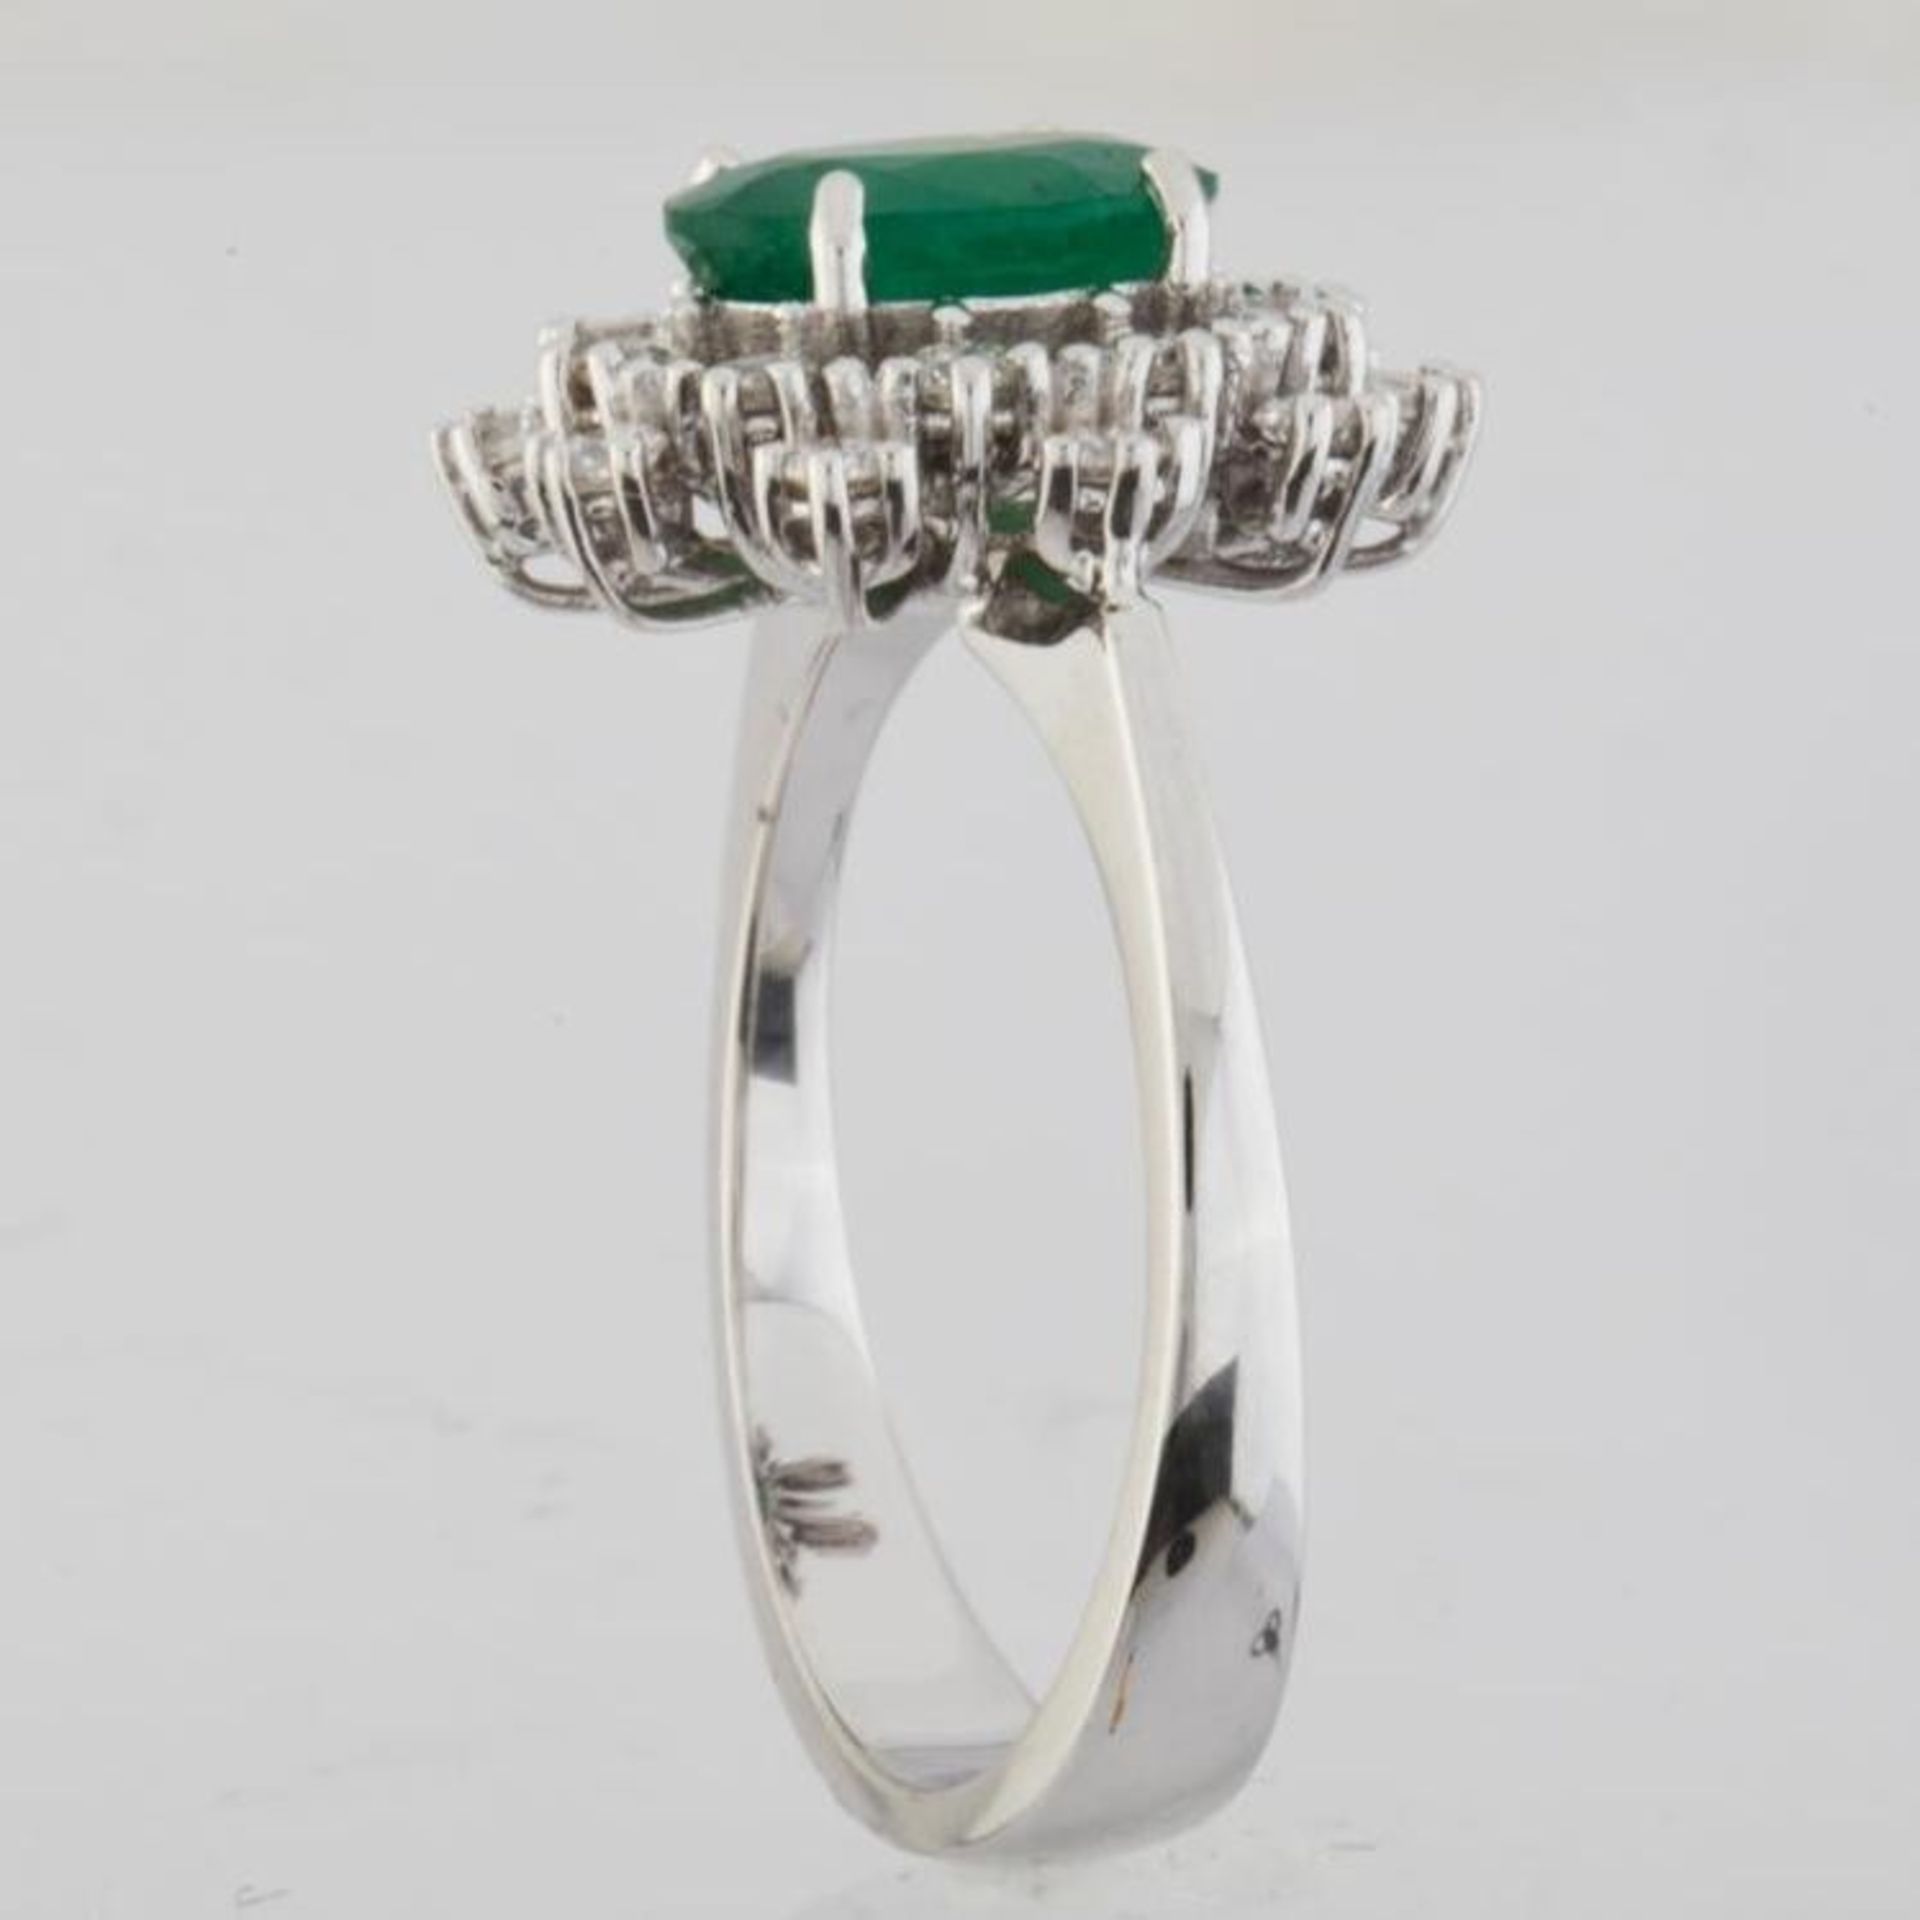 Certificated 18K White Gold Diamond & Emerald Ring - Image 2 of 4